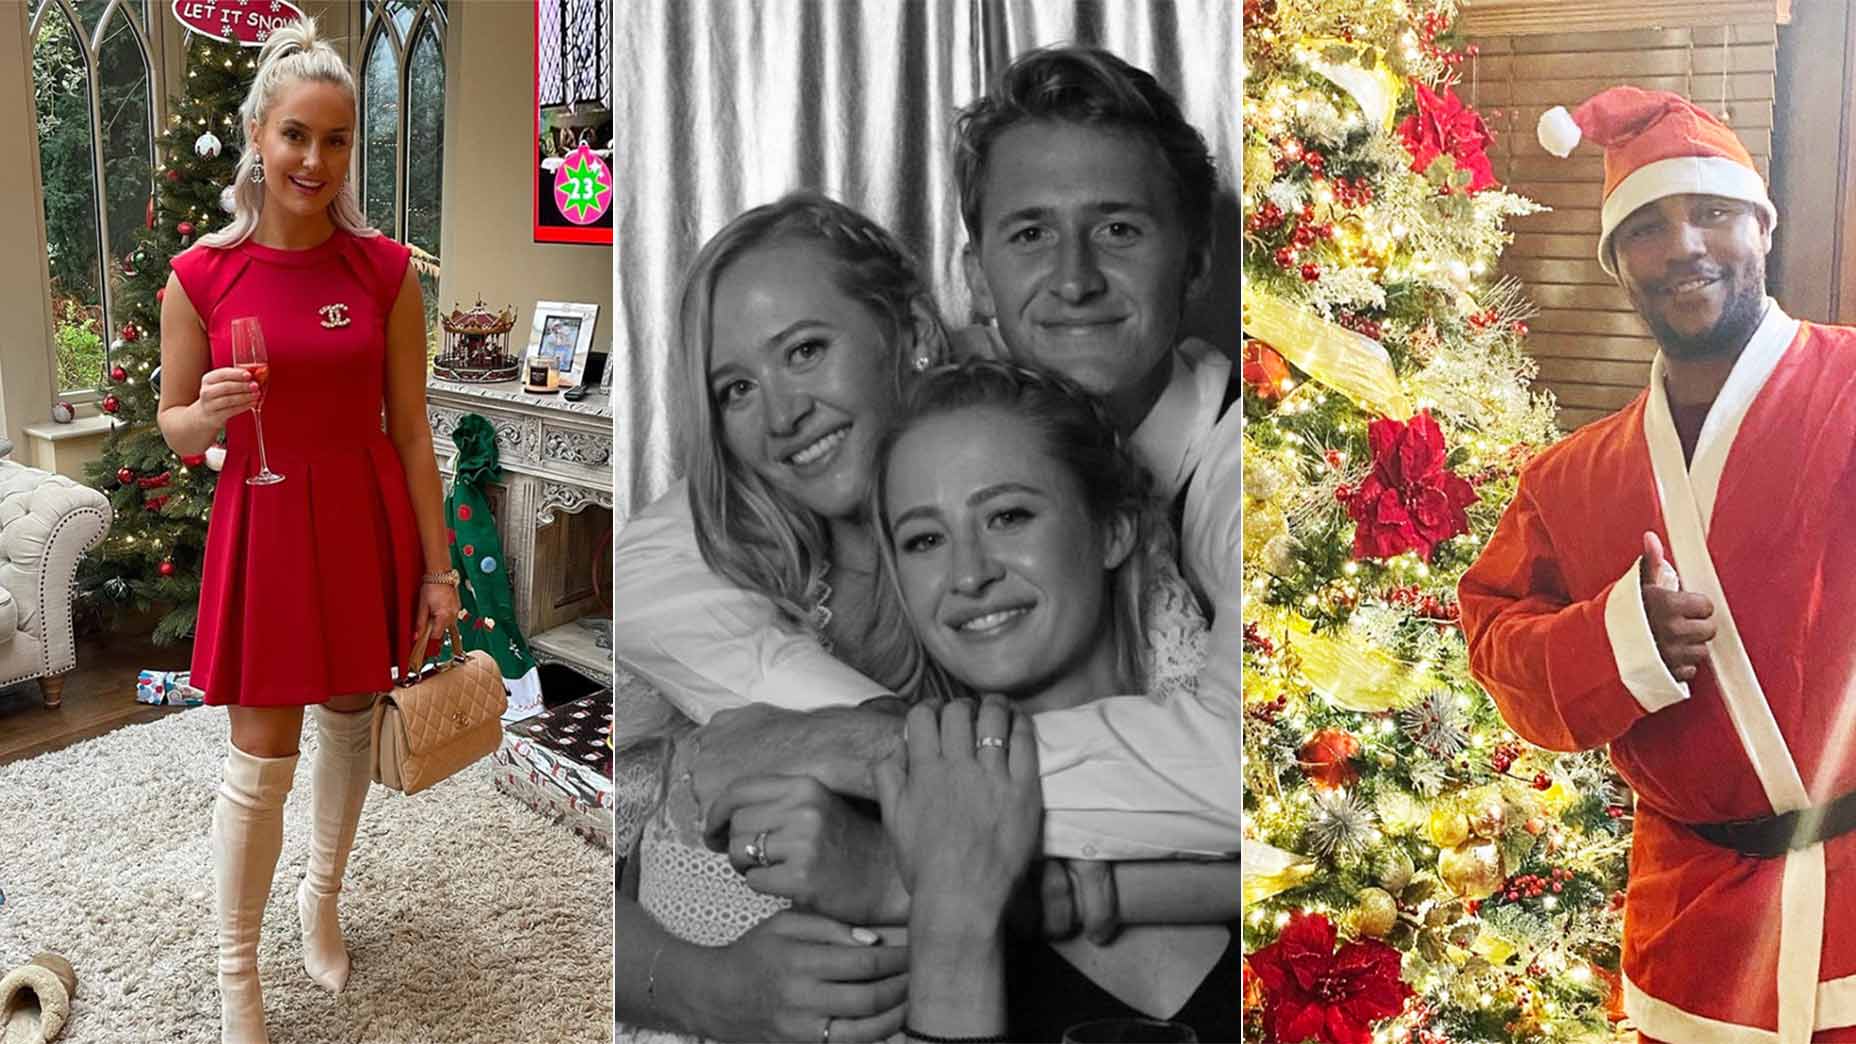 PHOTOS: How your favorite pros celebrated the holidays